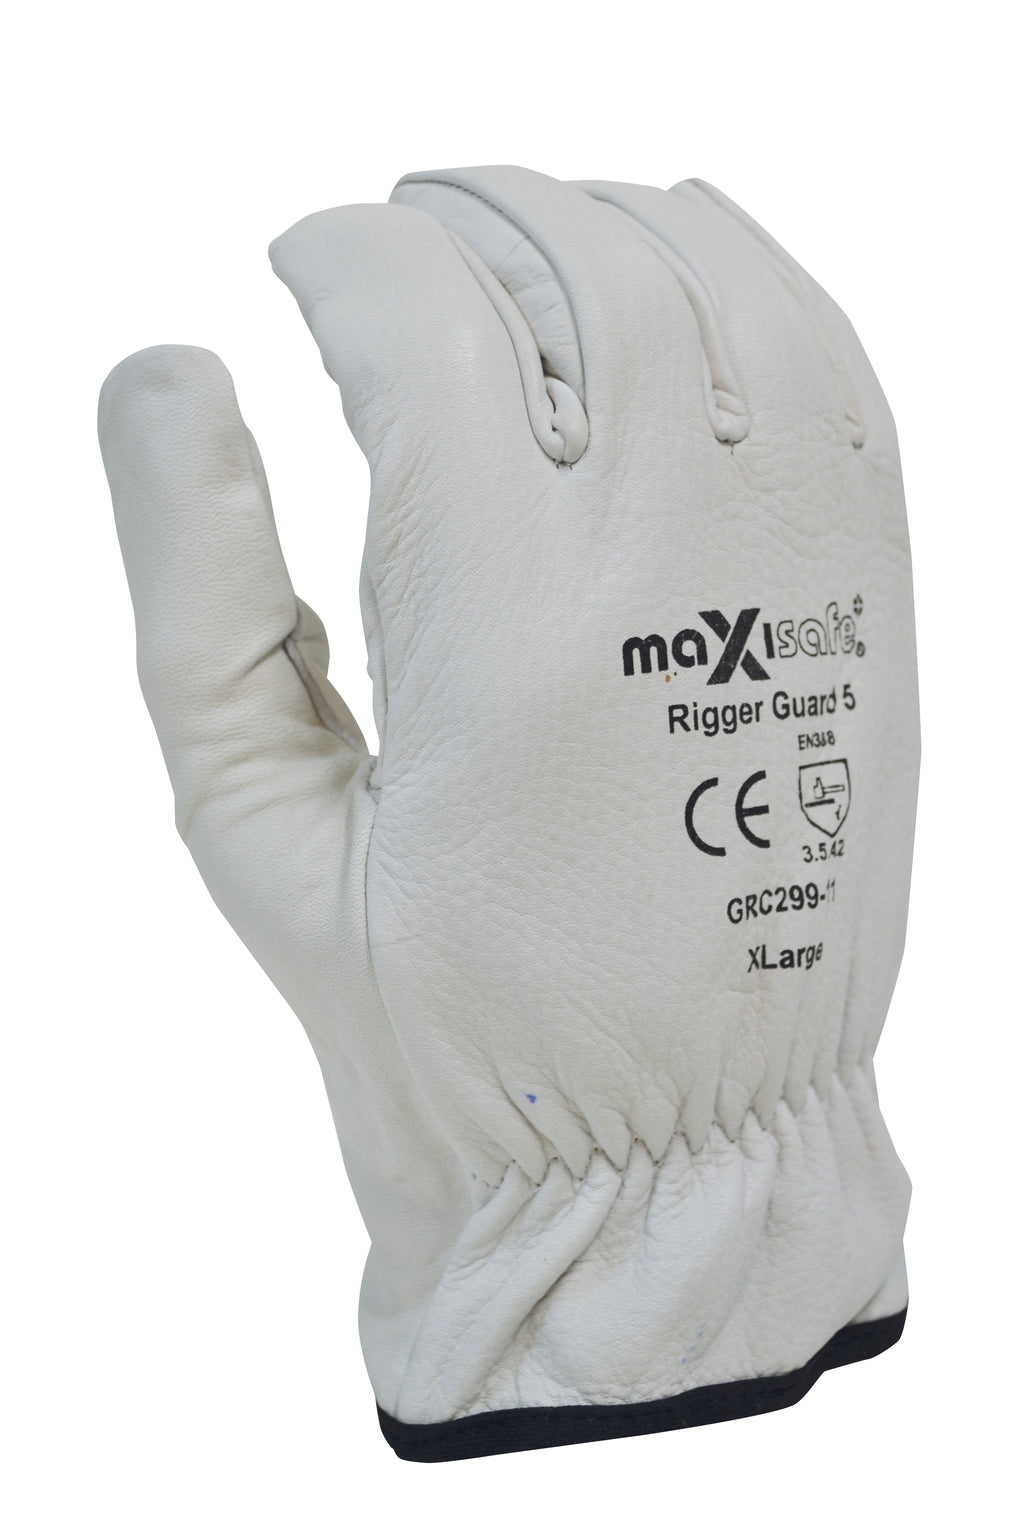 Maxisafe ‘Rigger Guard 5’ Cut Resistant Rigger Glove